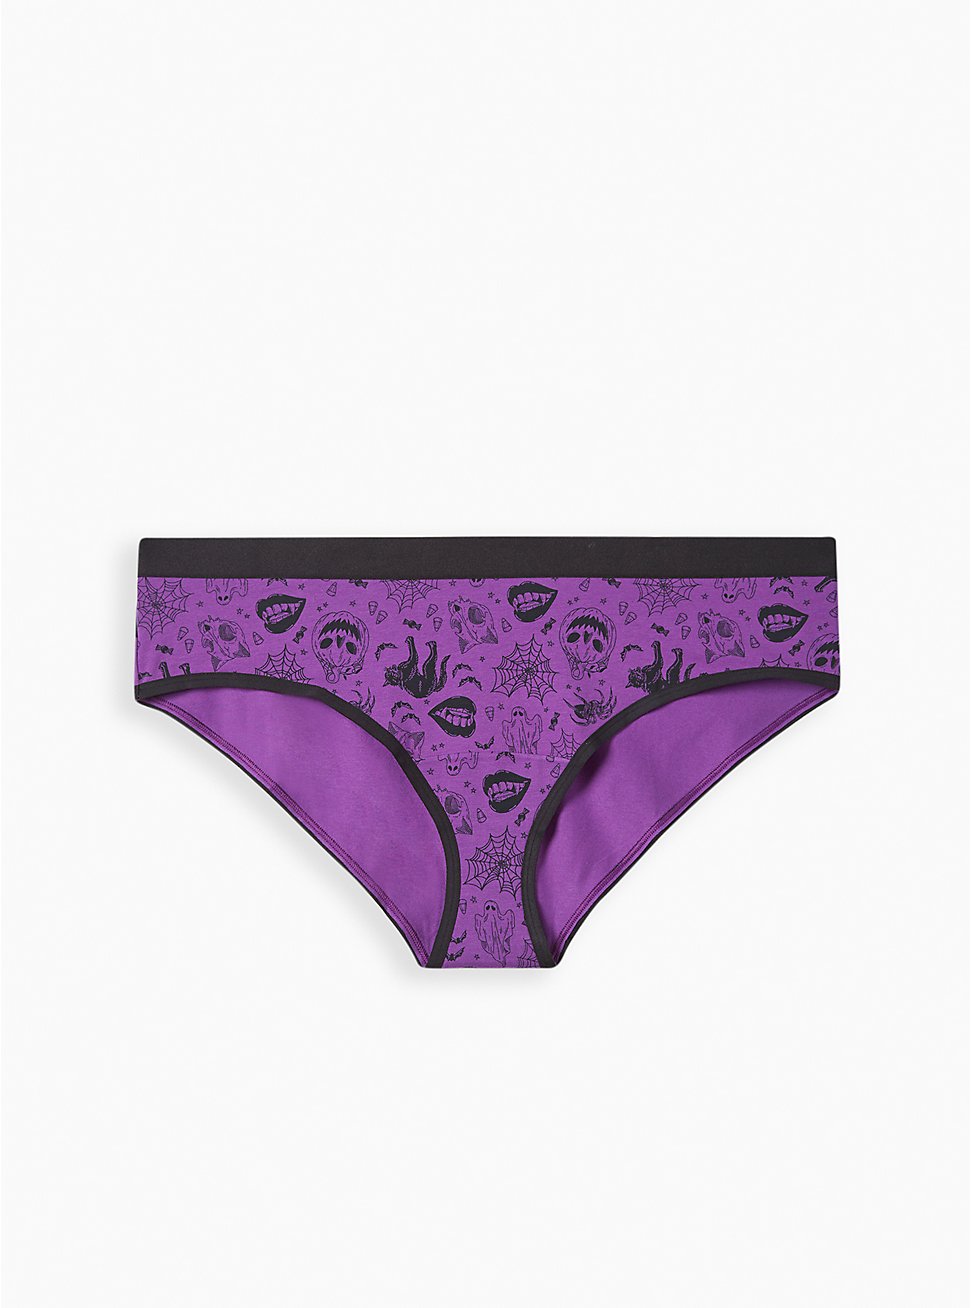 Plus Size Cotton Mid-Rise Hipster Panty, HALLOWEEN ICONS PINK, hi-res